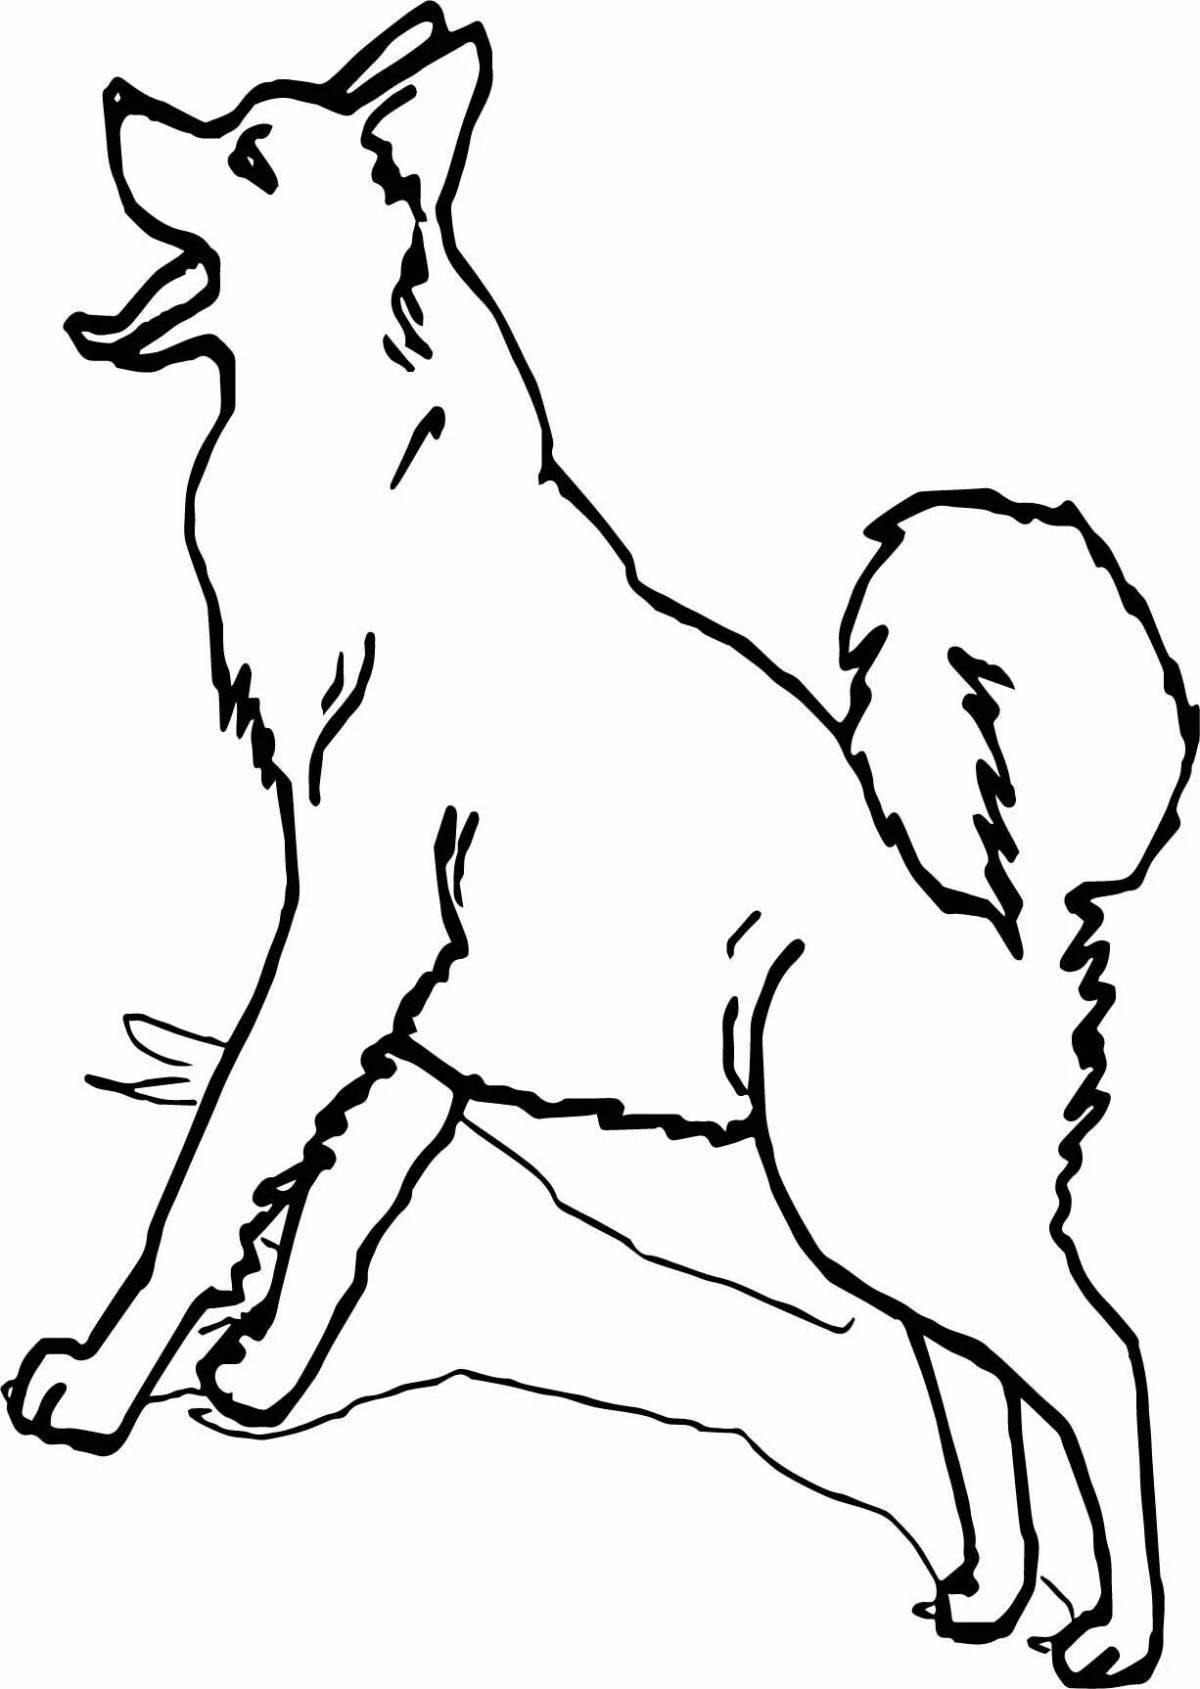 Husky coloring book for kids